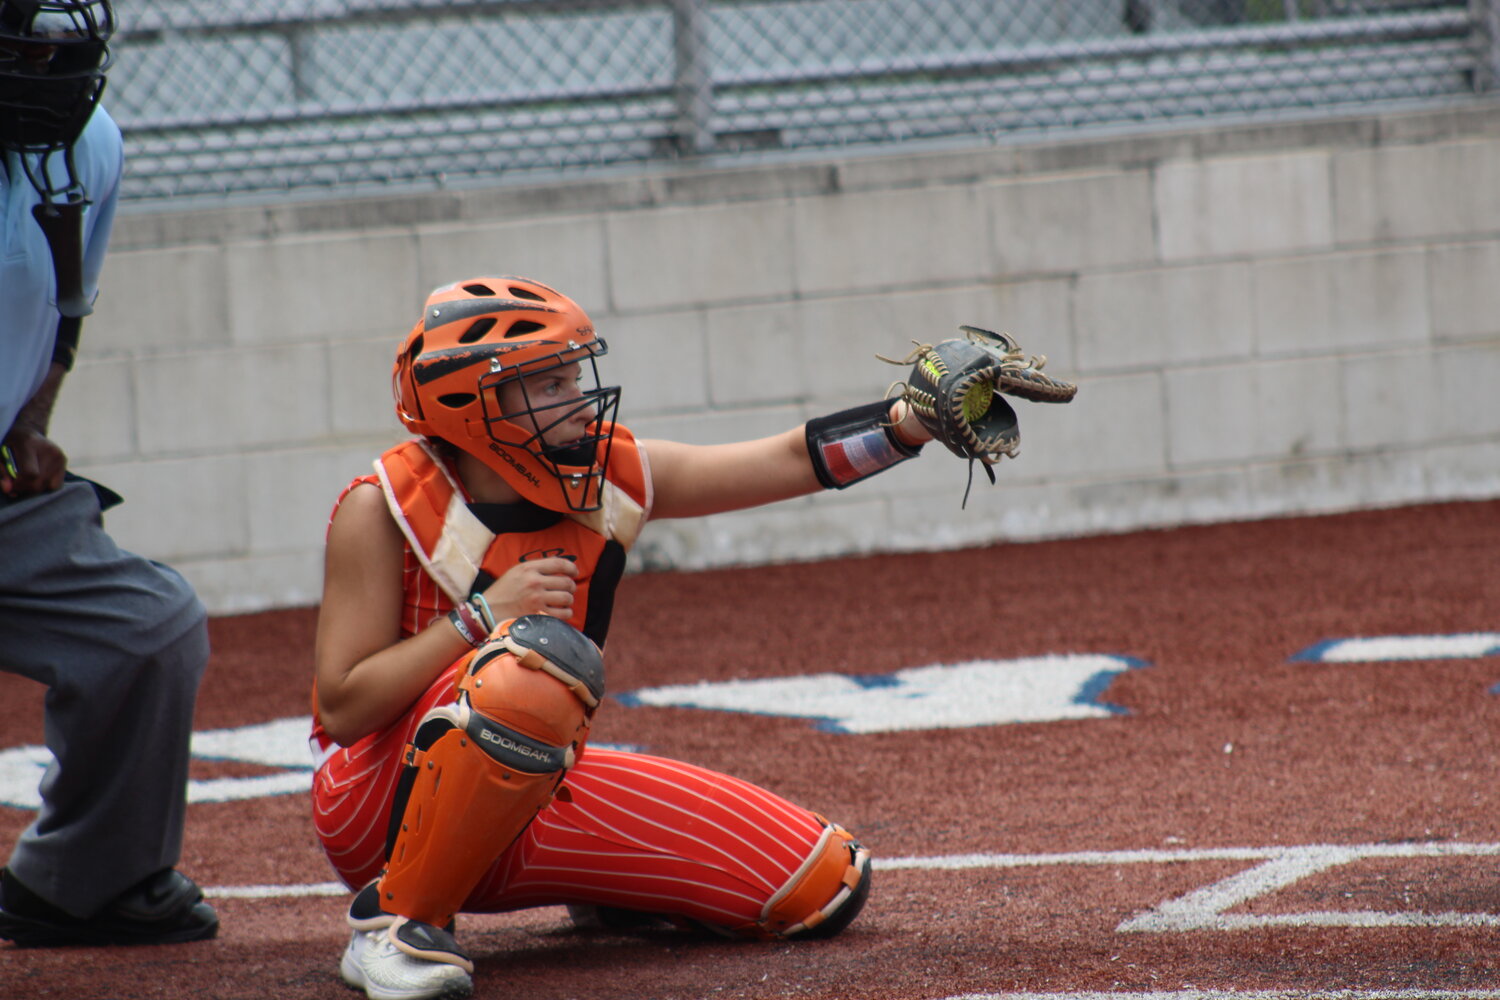 Lady Apaches senior catcher Sydney McCray (3) catches a pitch from pitcher Dixie Rae Lester (10).